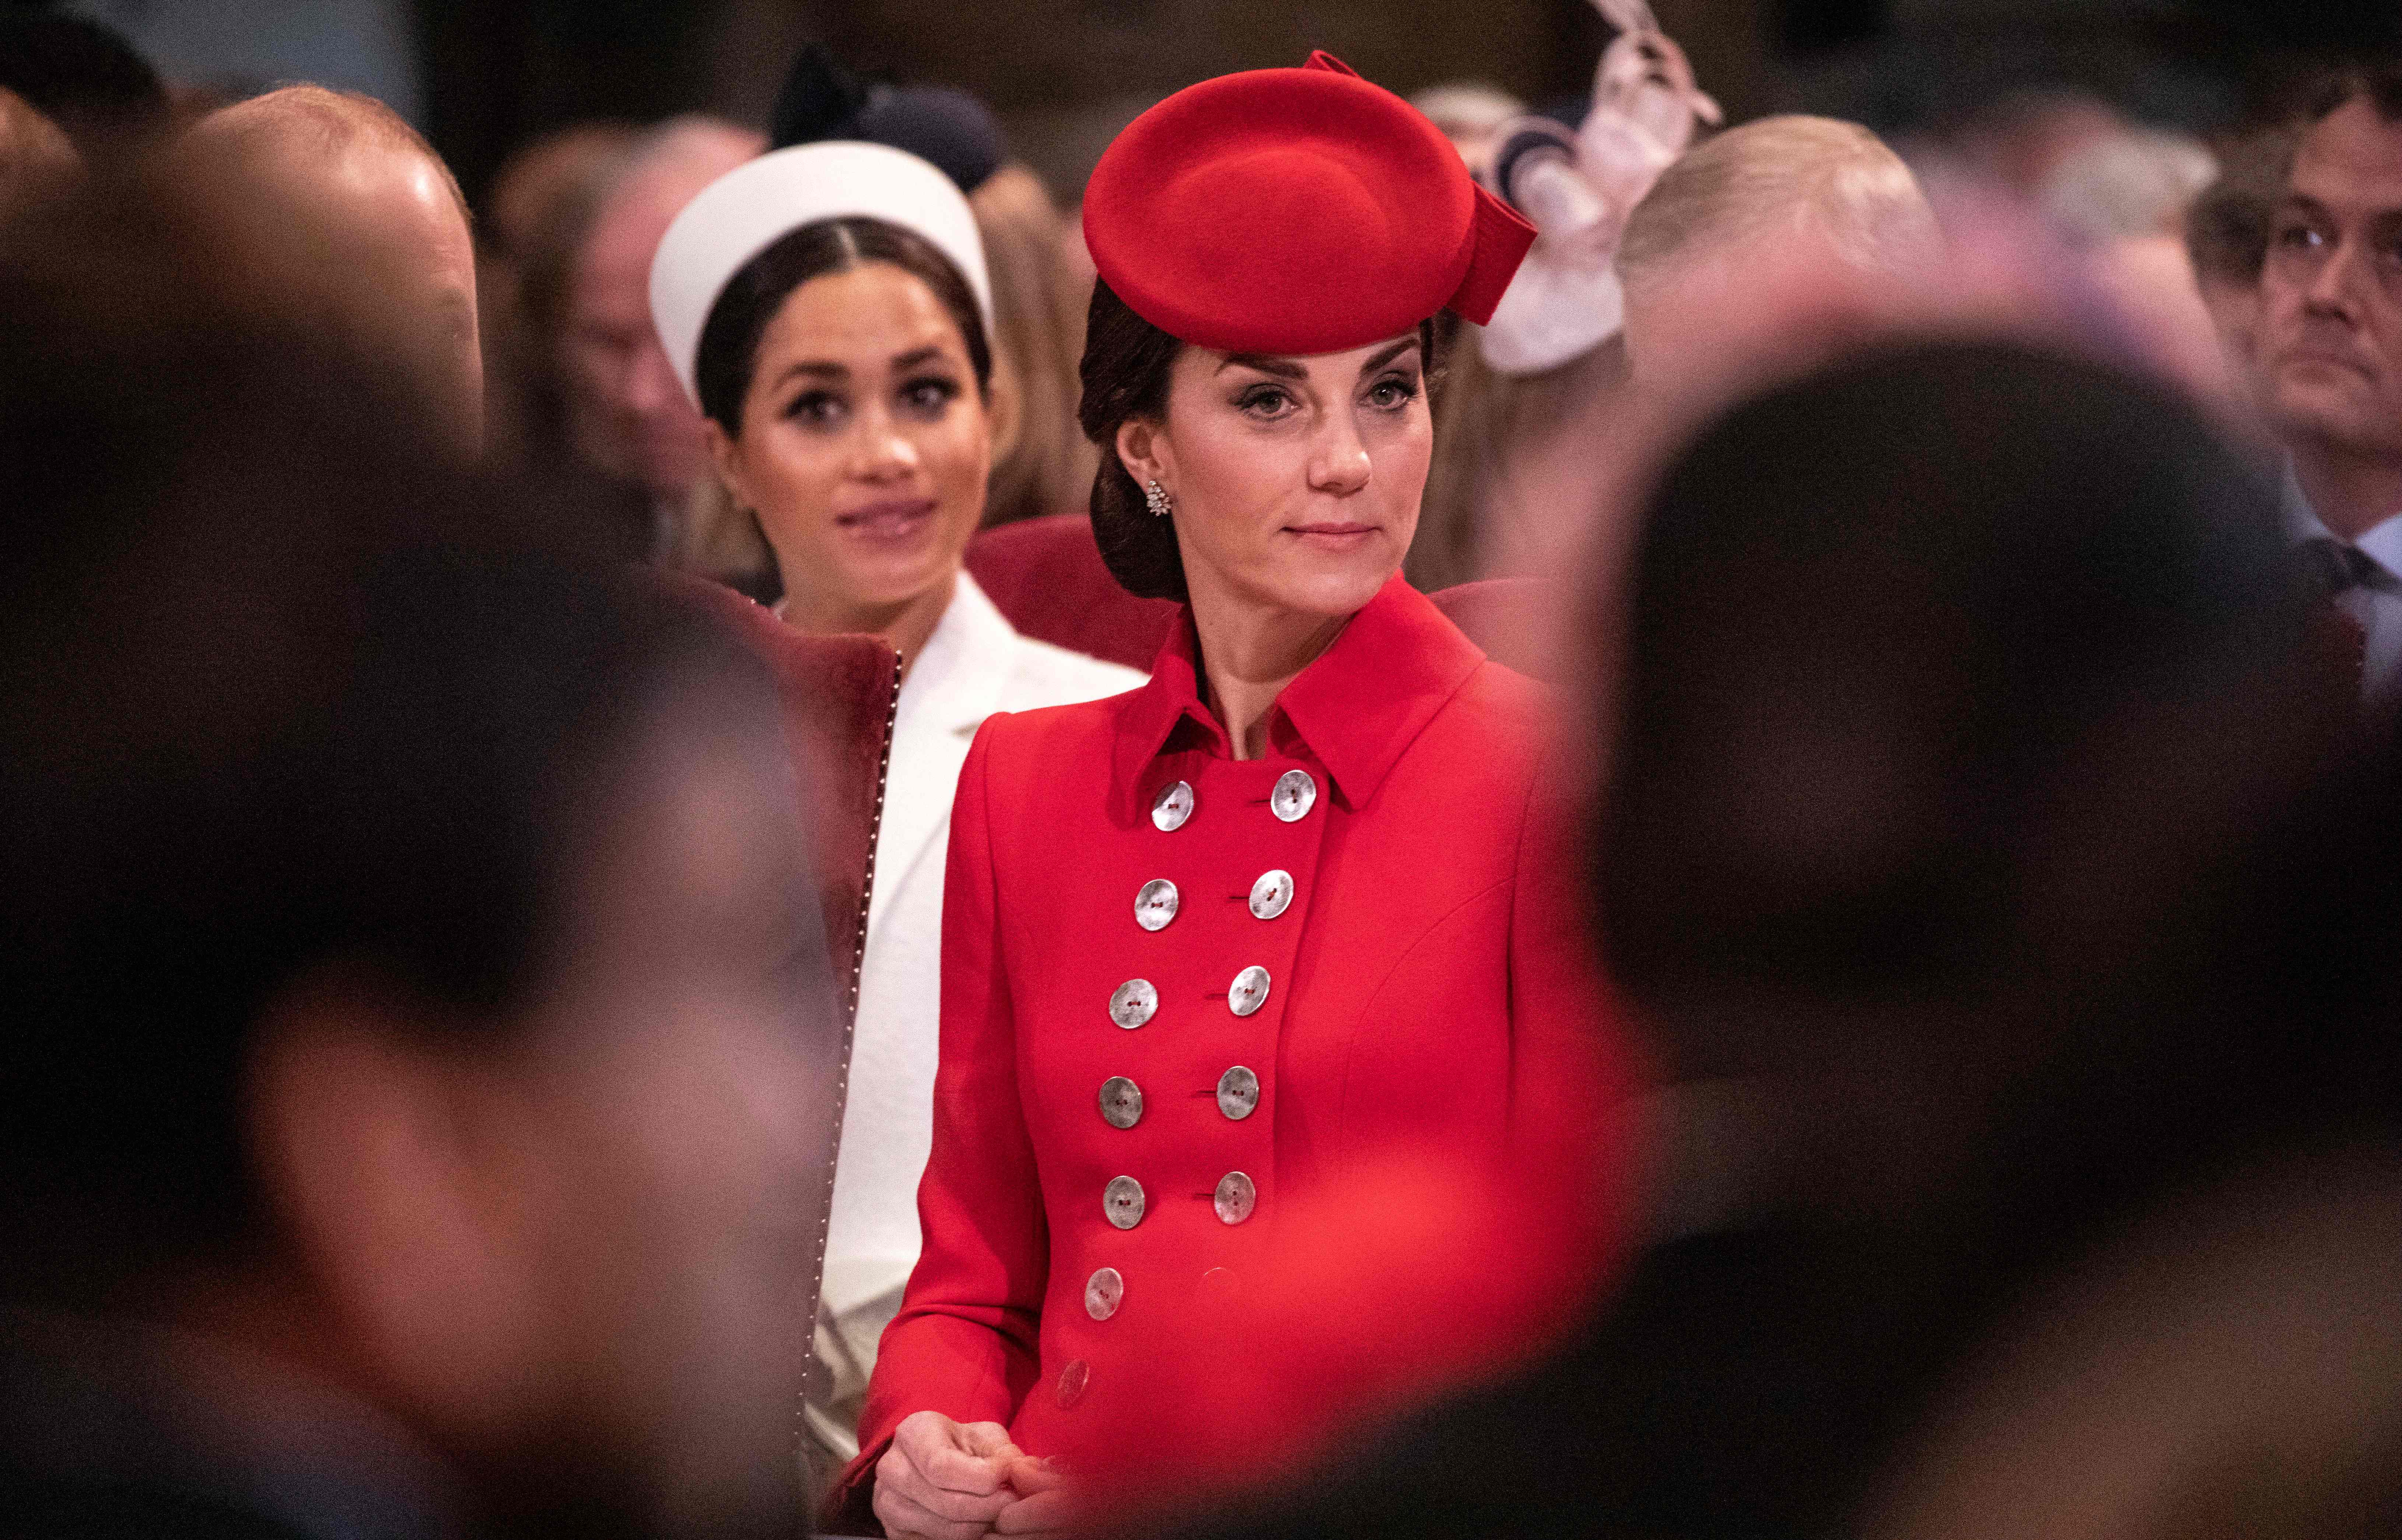 Meghan Markle and Princess Catherine at the Commonwealth Day service at Westminster Abbey in London on March 11, 2019 | Source: Getty Images